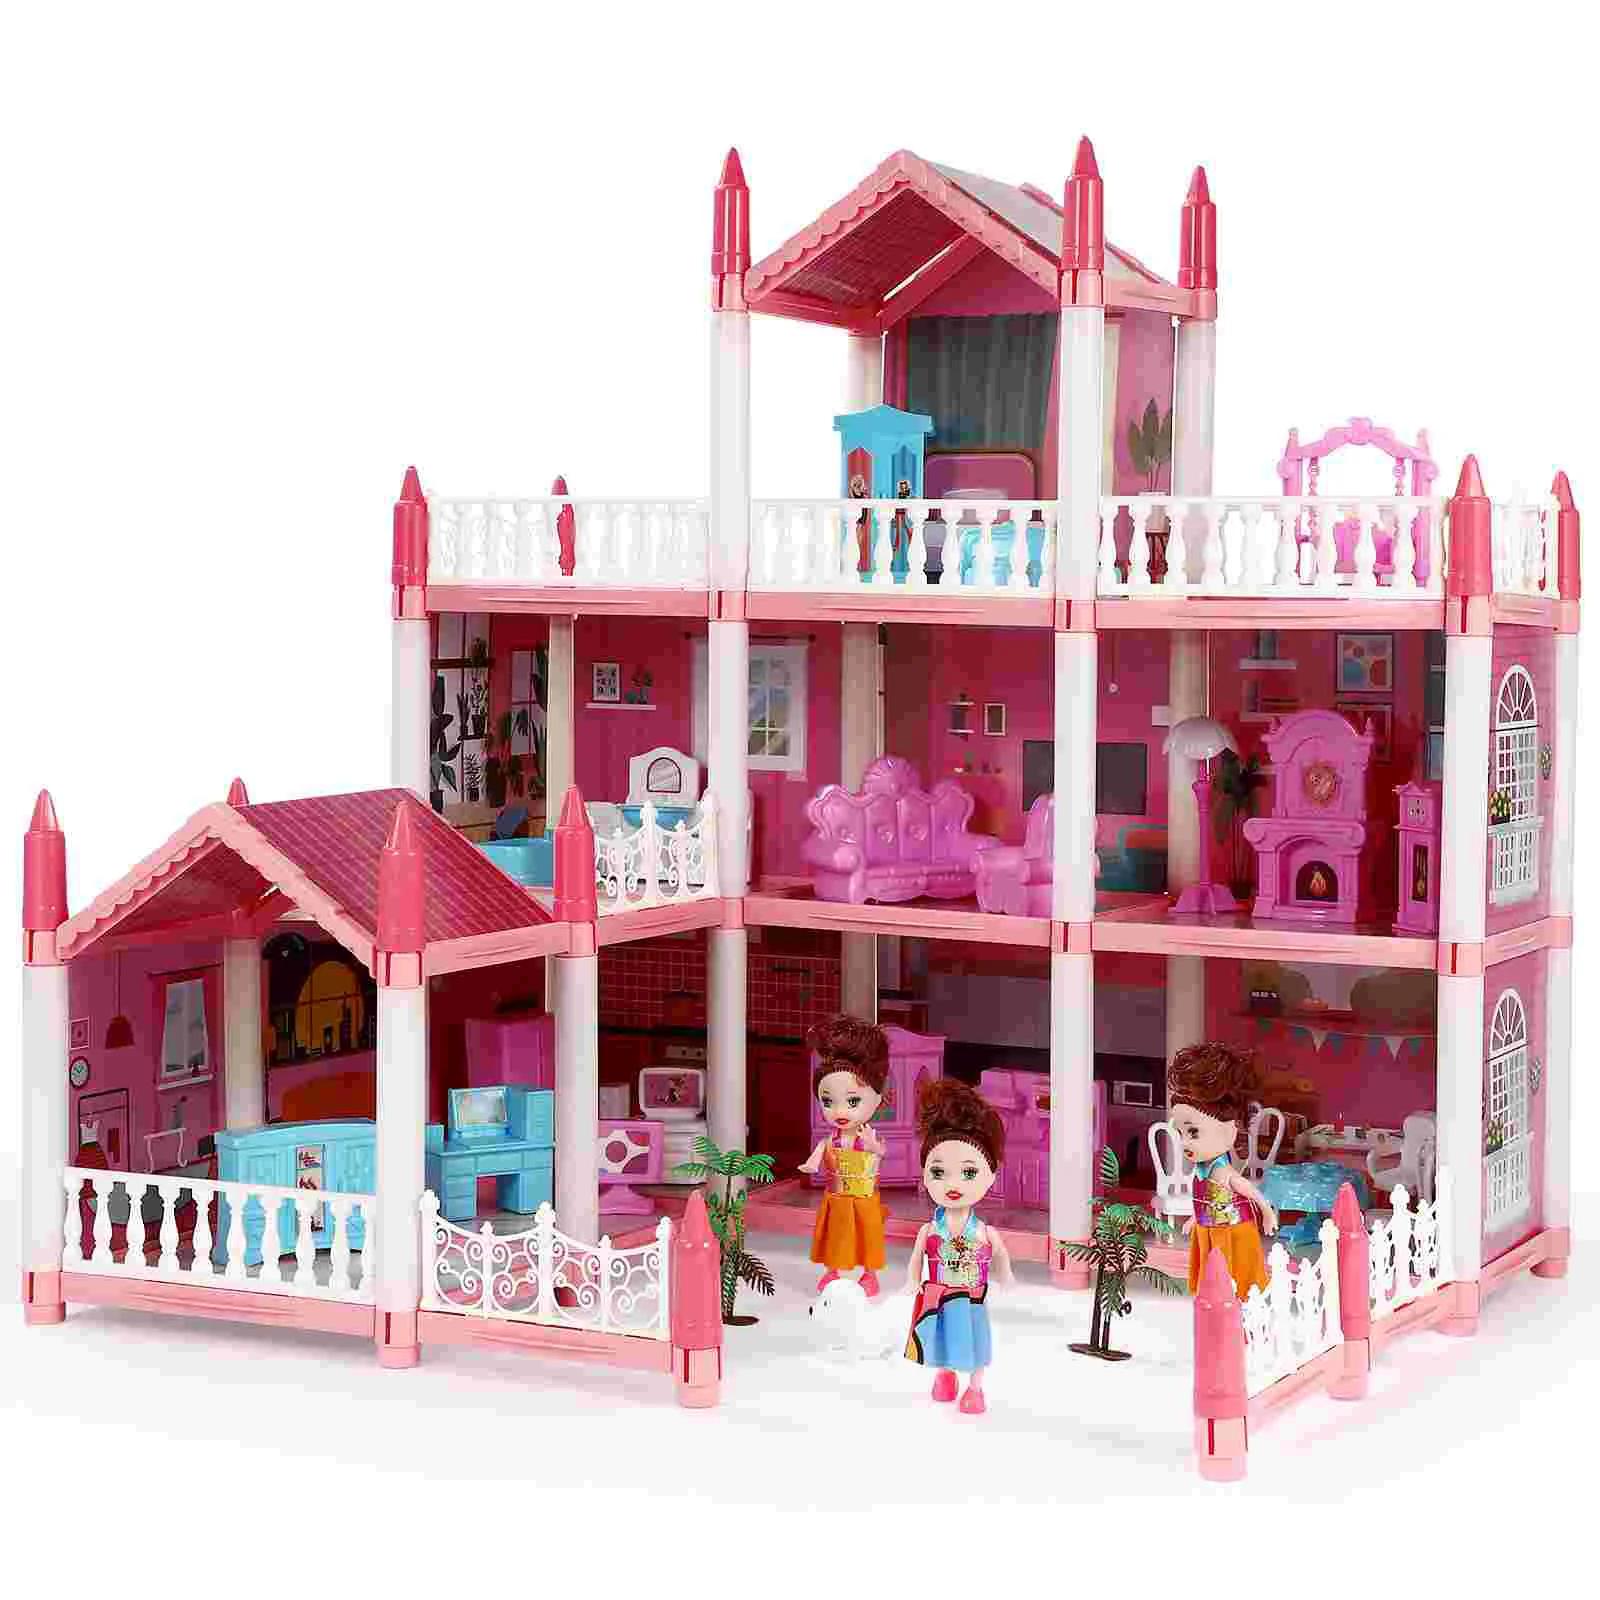 

DIY House Toy Princess Room With Furniture Pp For Little Girls Houses Indoor Toddler